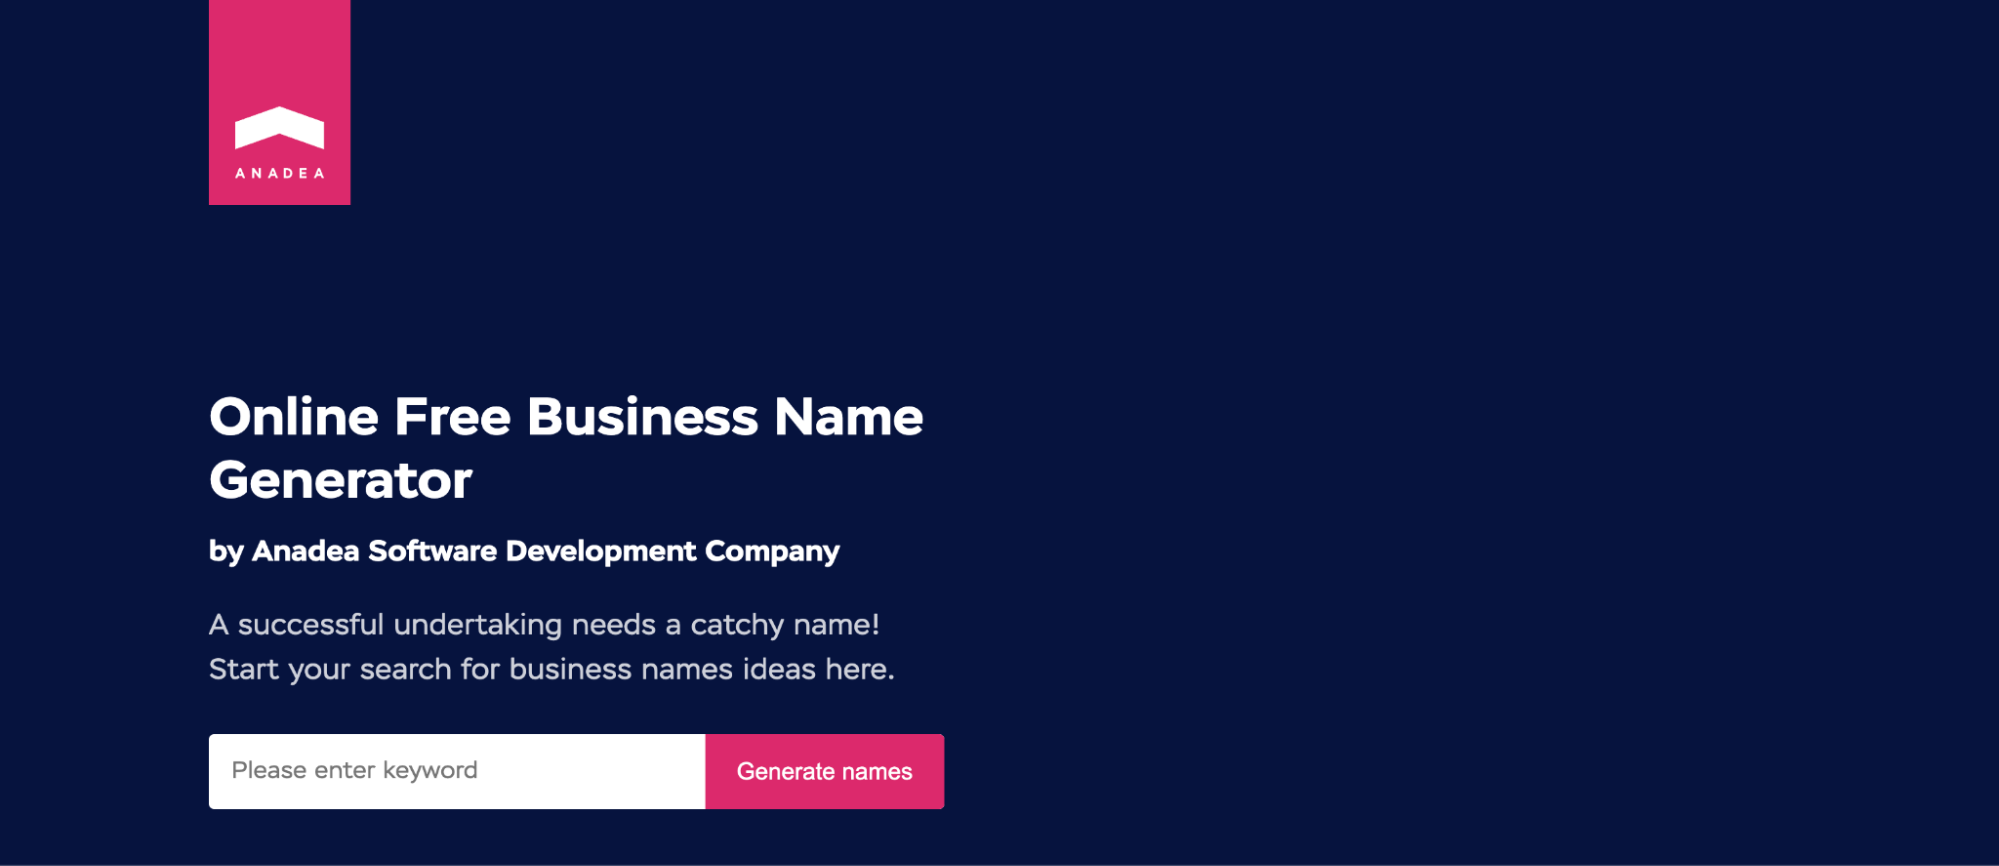 Anadea free business name generator with search bar and button to generate names.